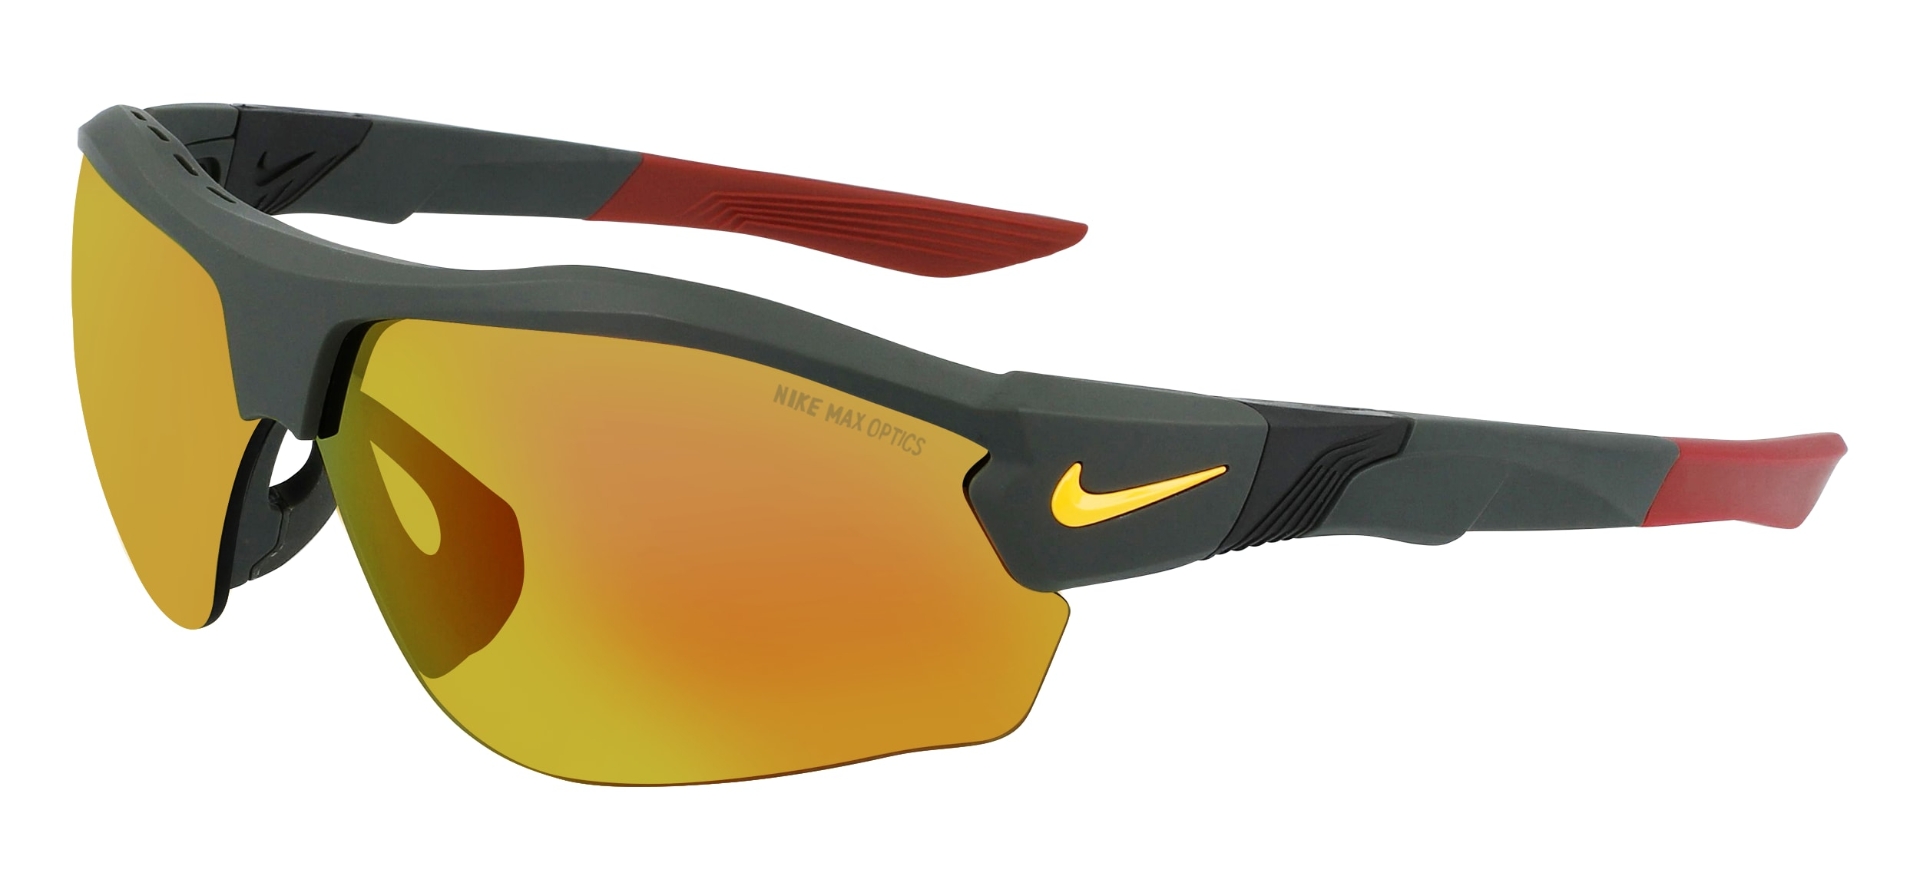 Nike Show X3 men's tennis prescription sunglasses in matte grey and red with grey orange lenses